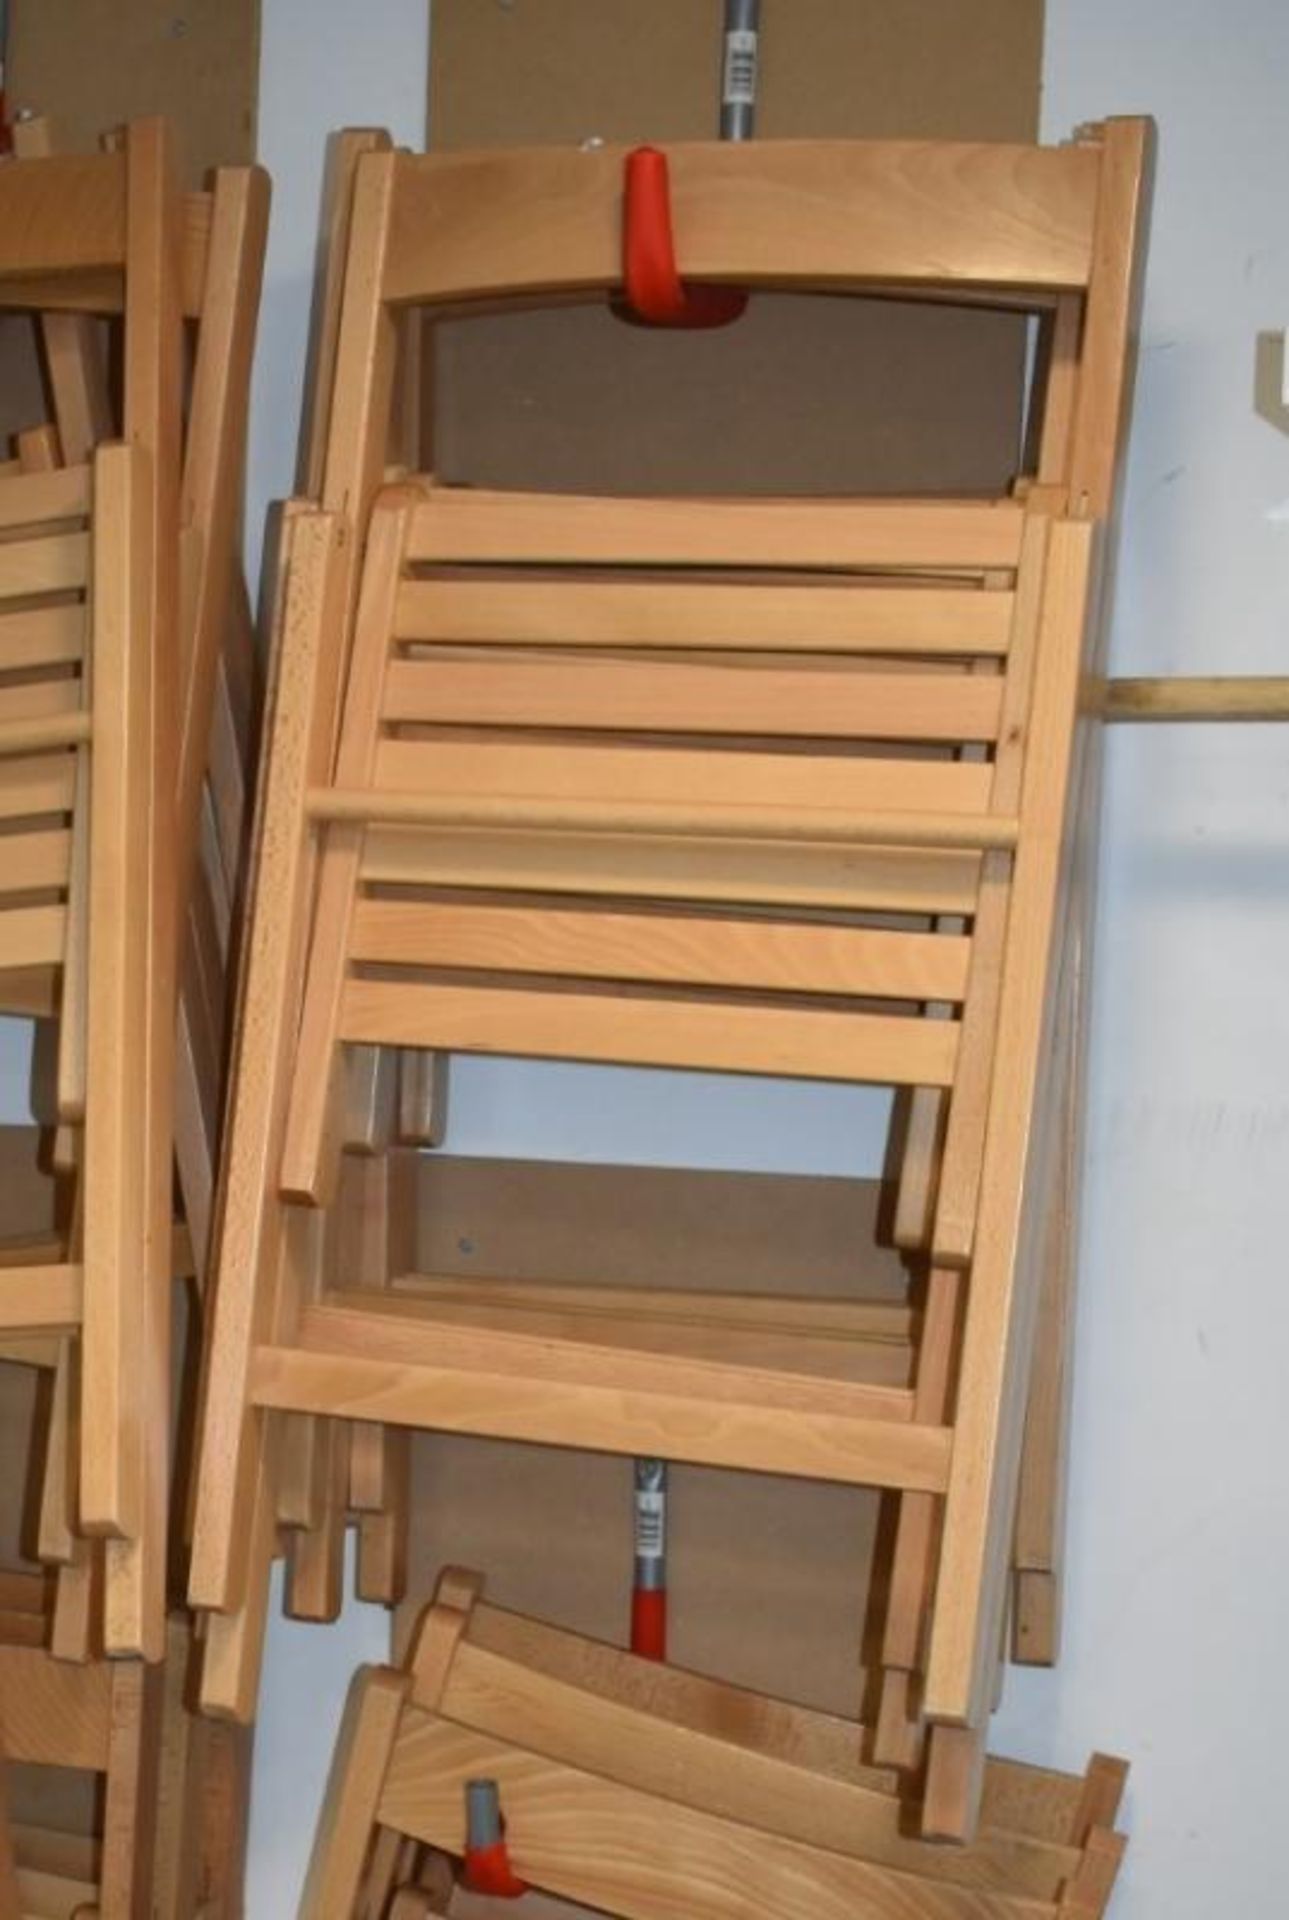 14 x Wooden Folding Chairs - CL489 - Location: Putney, London, SW15